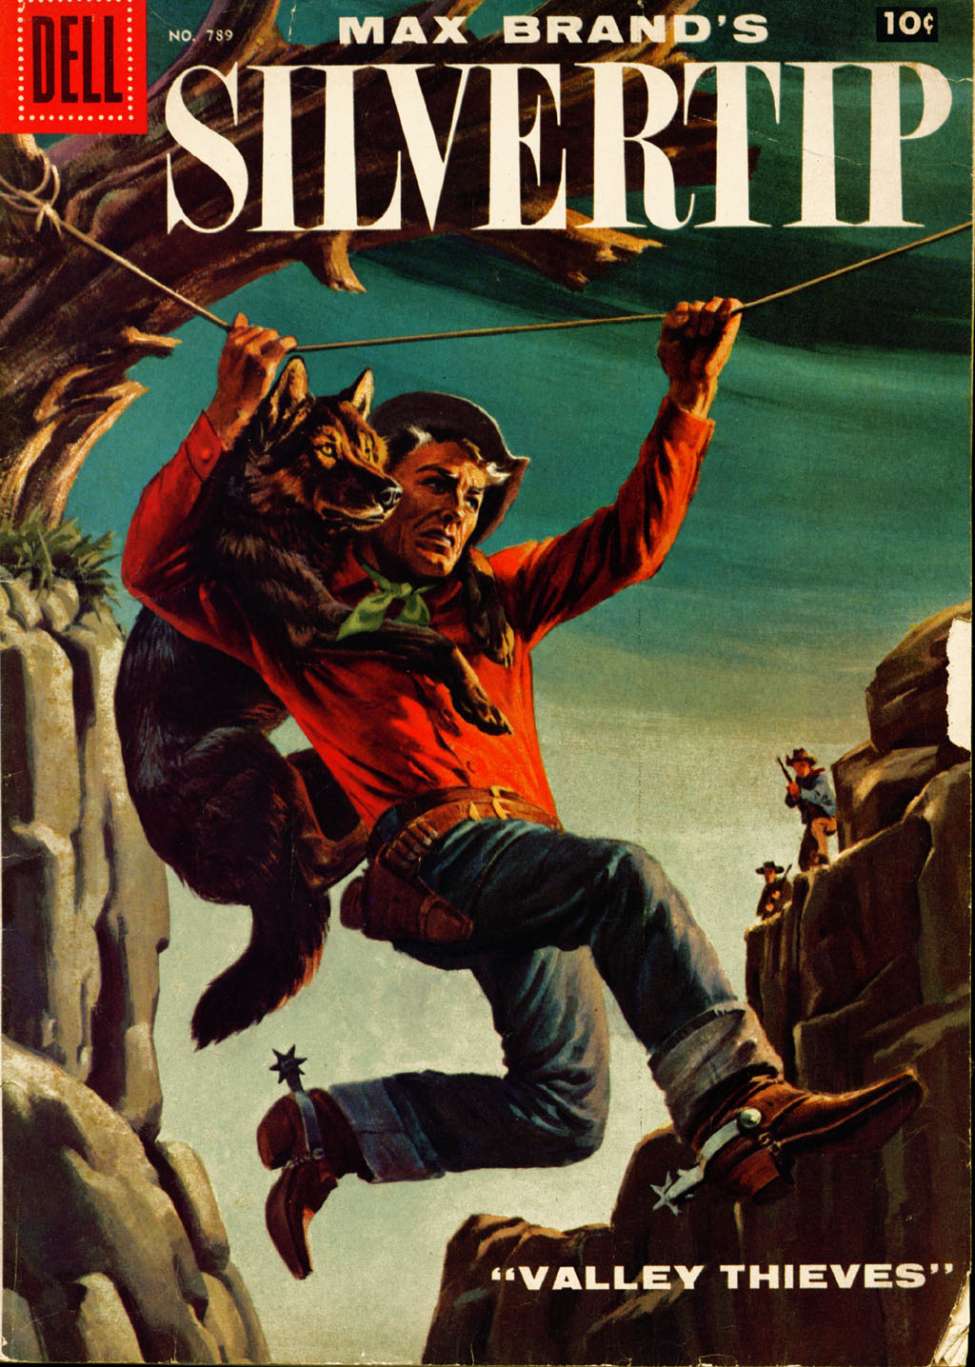 Comic Book Cover For 0789 - Max Brand's Silvertip